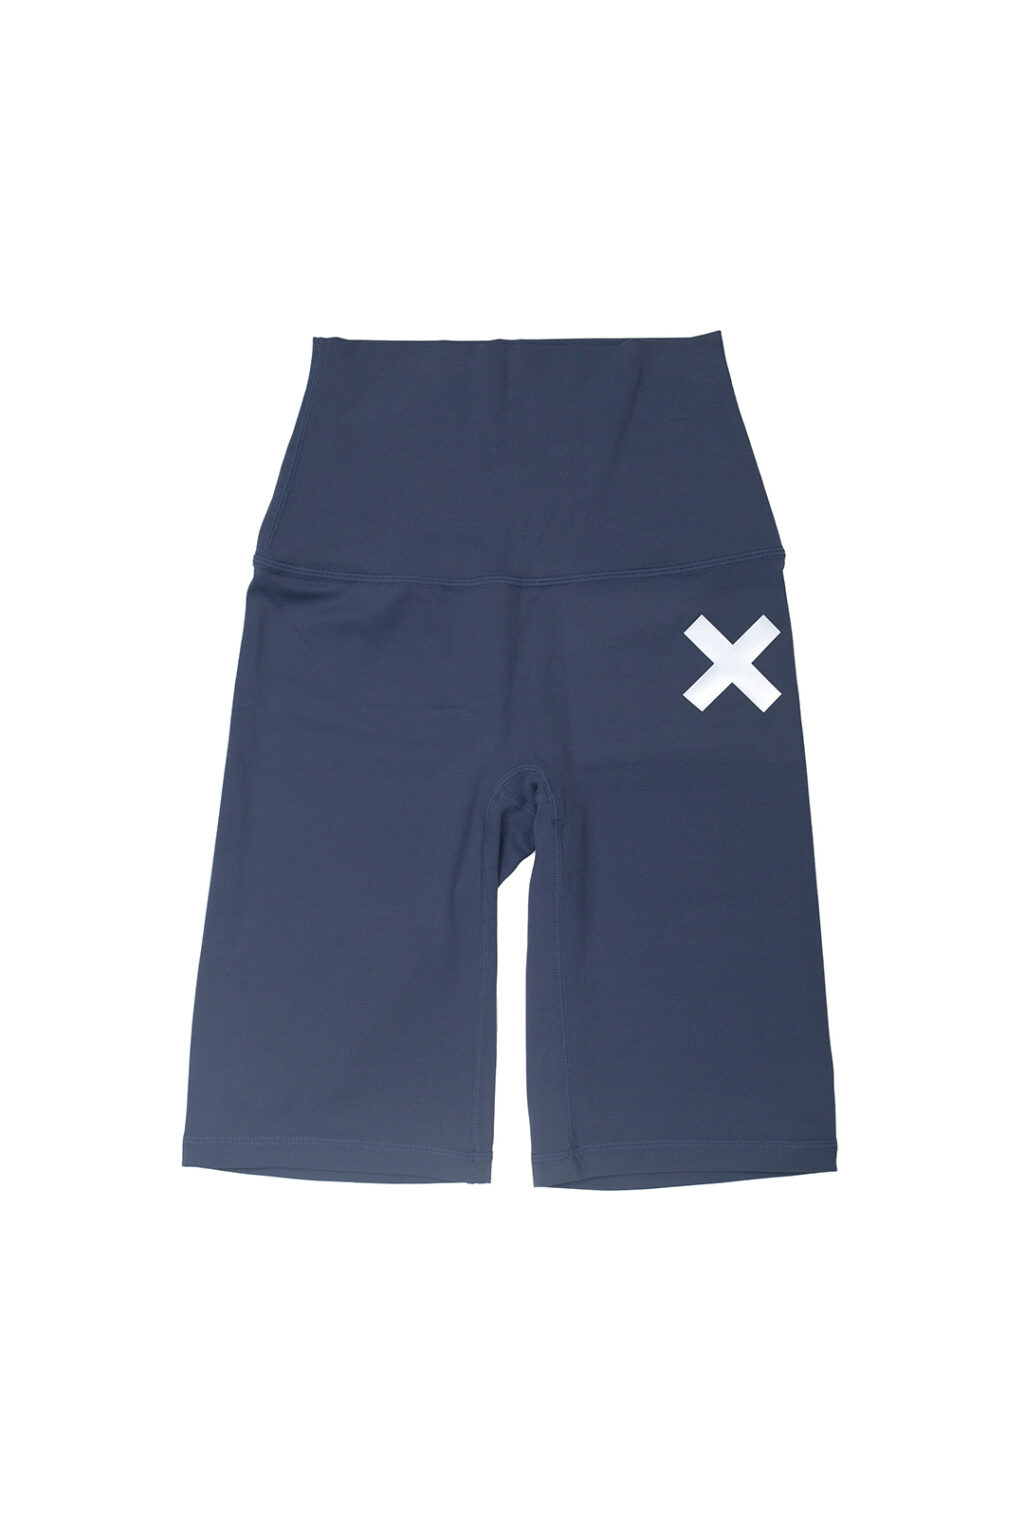 Time Out X Bike Shorts – Dusty Blue – Front